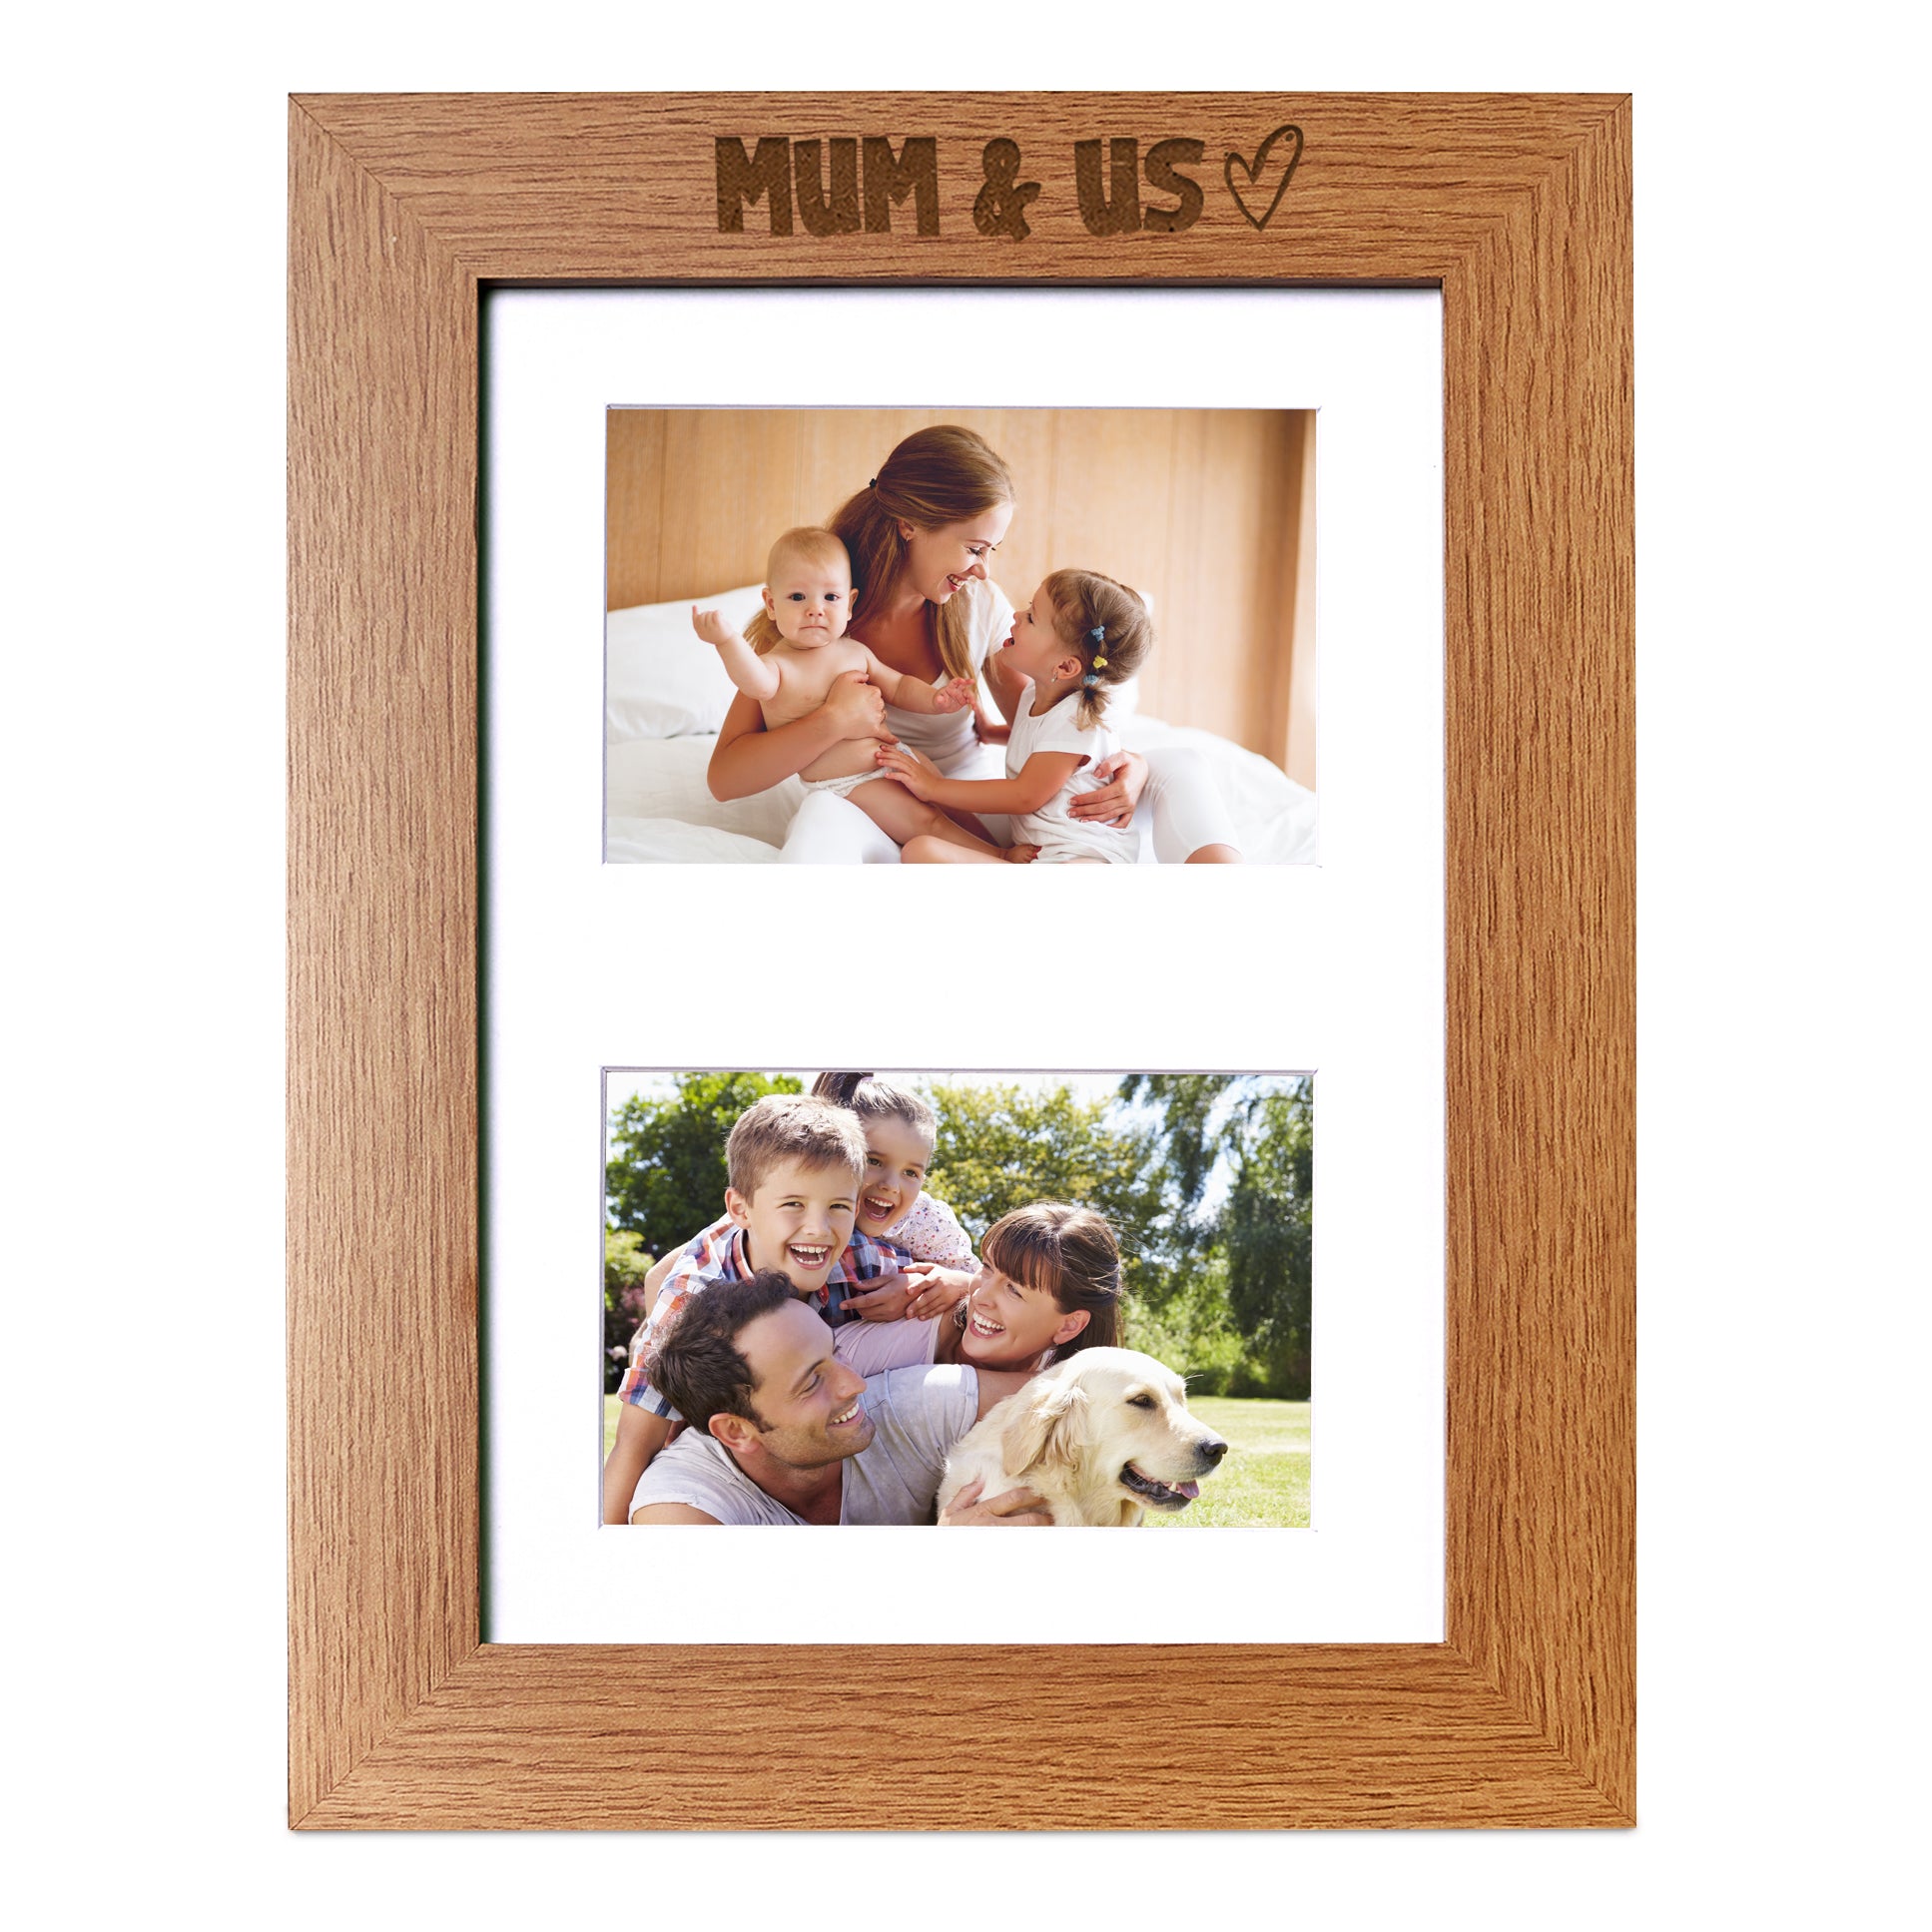 Mum and Us Photo Picture Frame Double 6x4 Inch Landscape